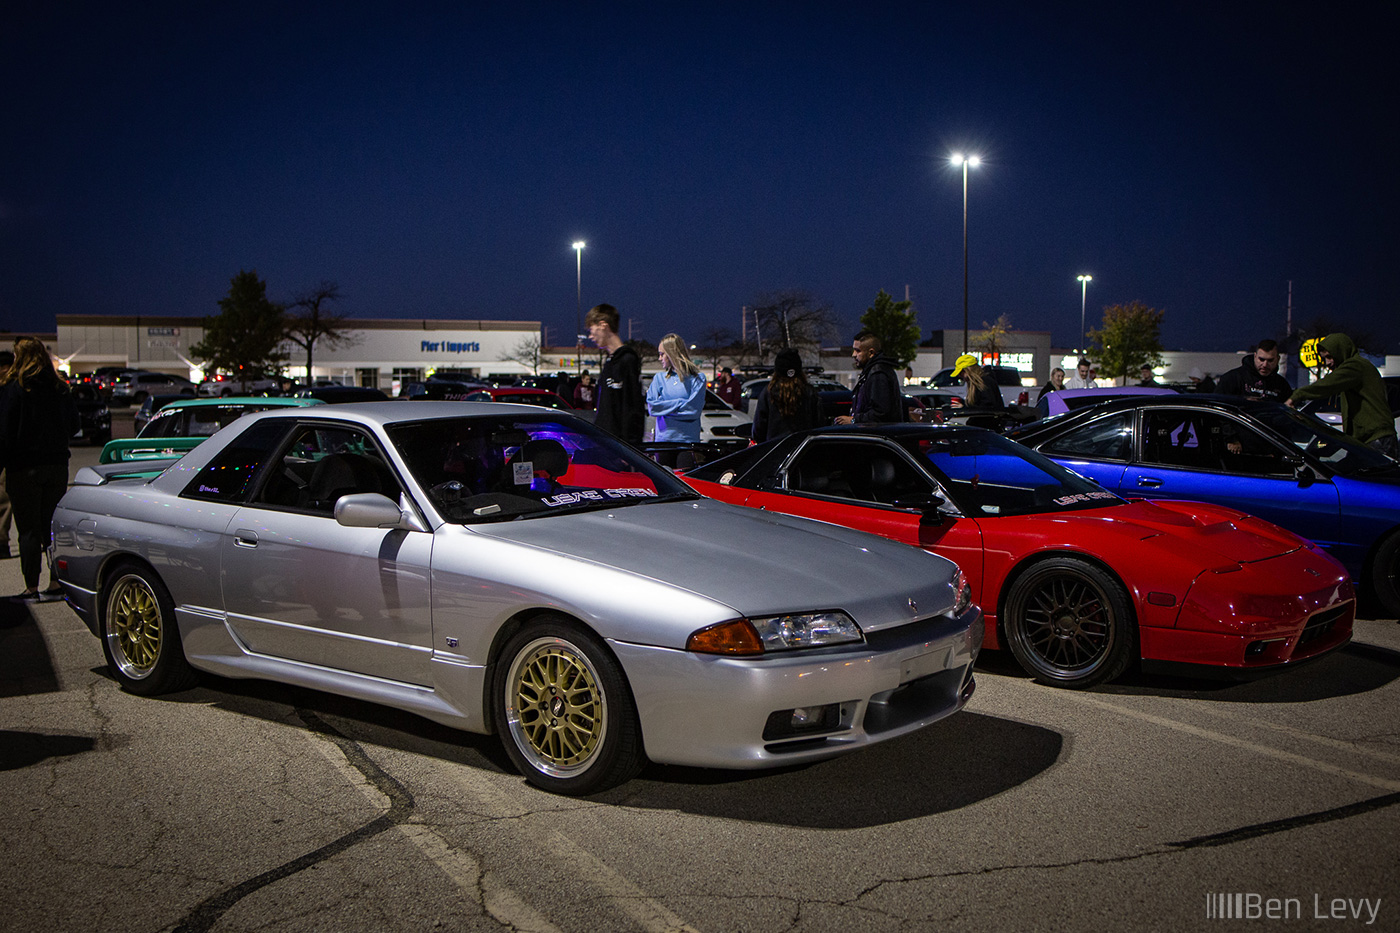 Silver Nissan Skyline and Red Acura NSX